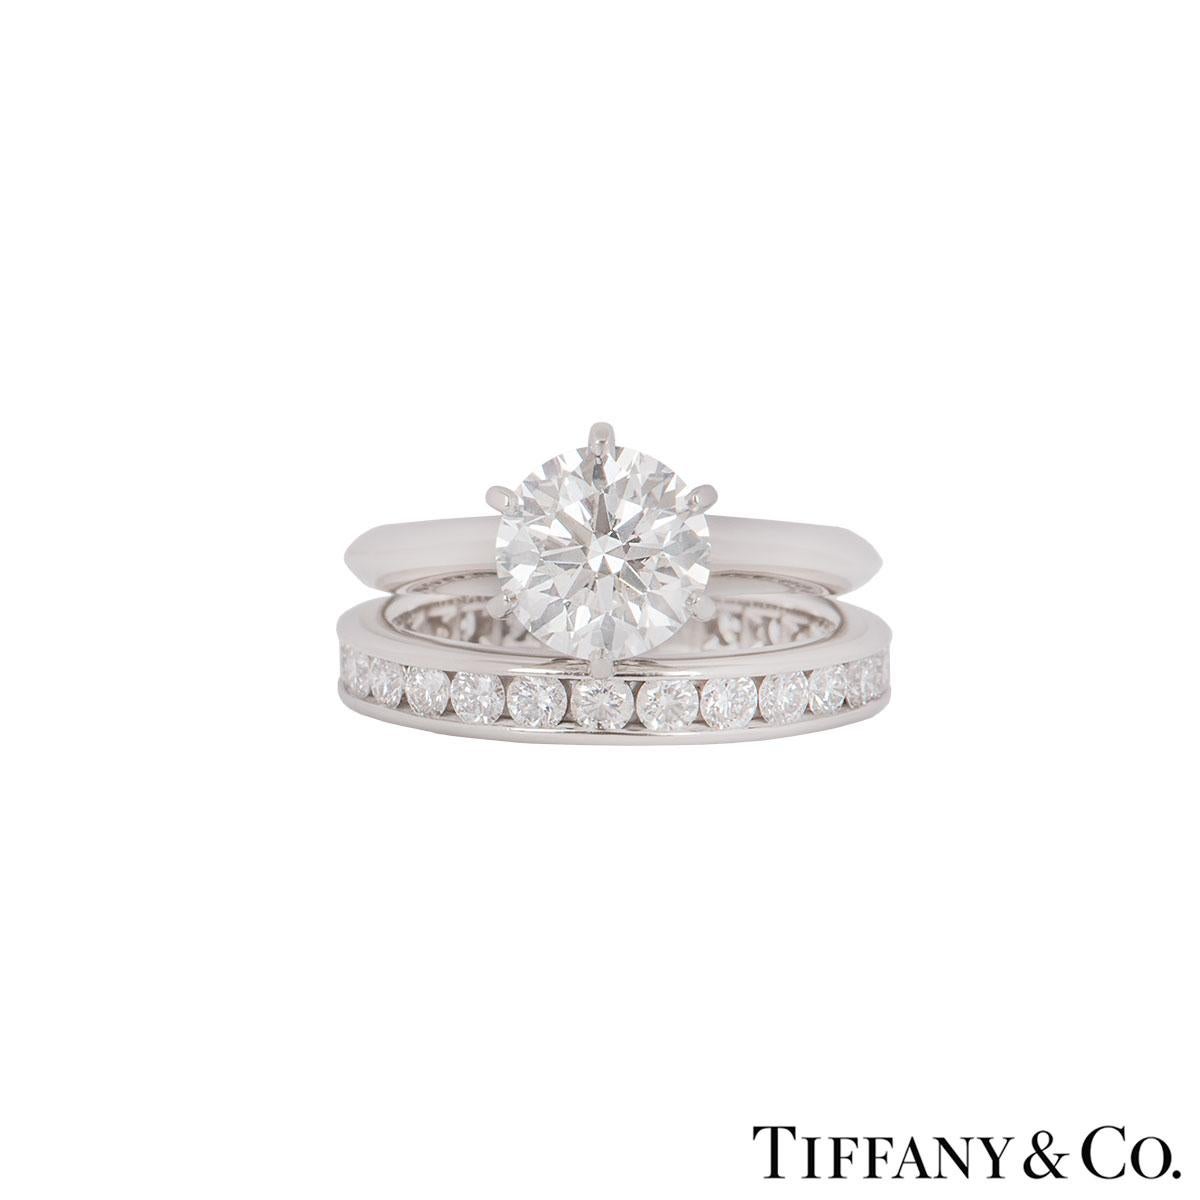 A stunning platinum diamond ring with a full diamond eternity ring by Tiffany & Co. The ring features a round brilliant cut diamond in a 6 claw setting with a weight of 1.61ct, I colour and VS2 clarity.  The diamond scores an excellent rating in all